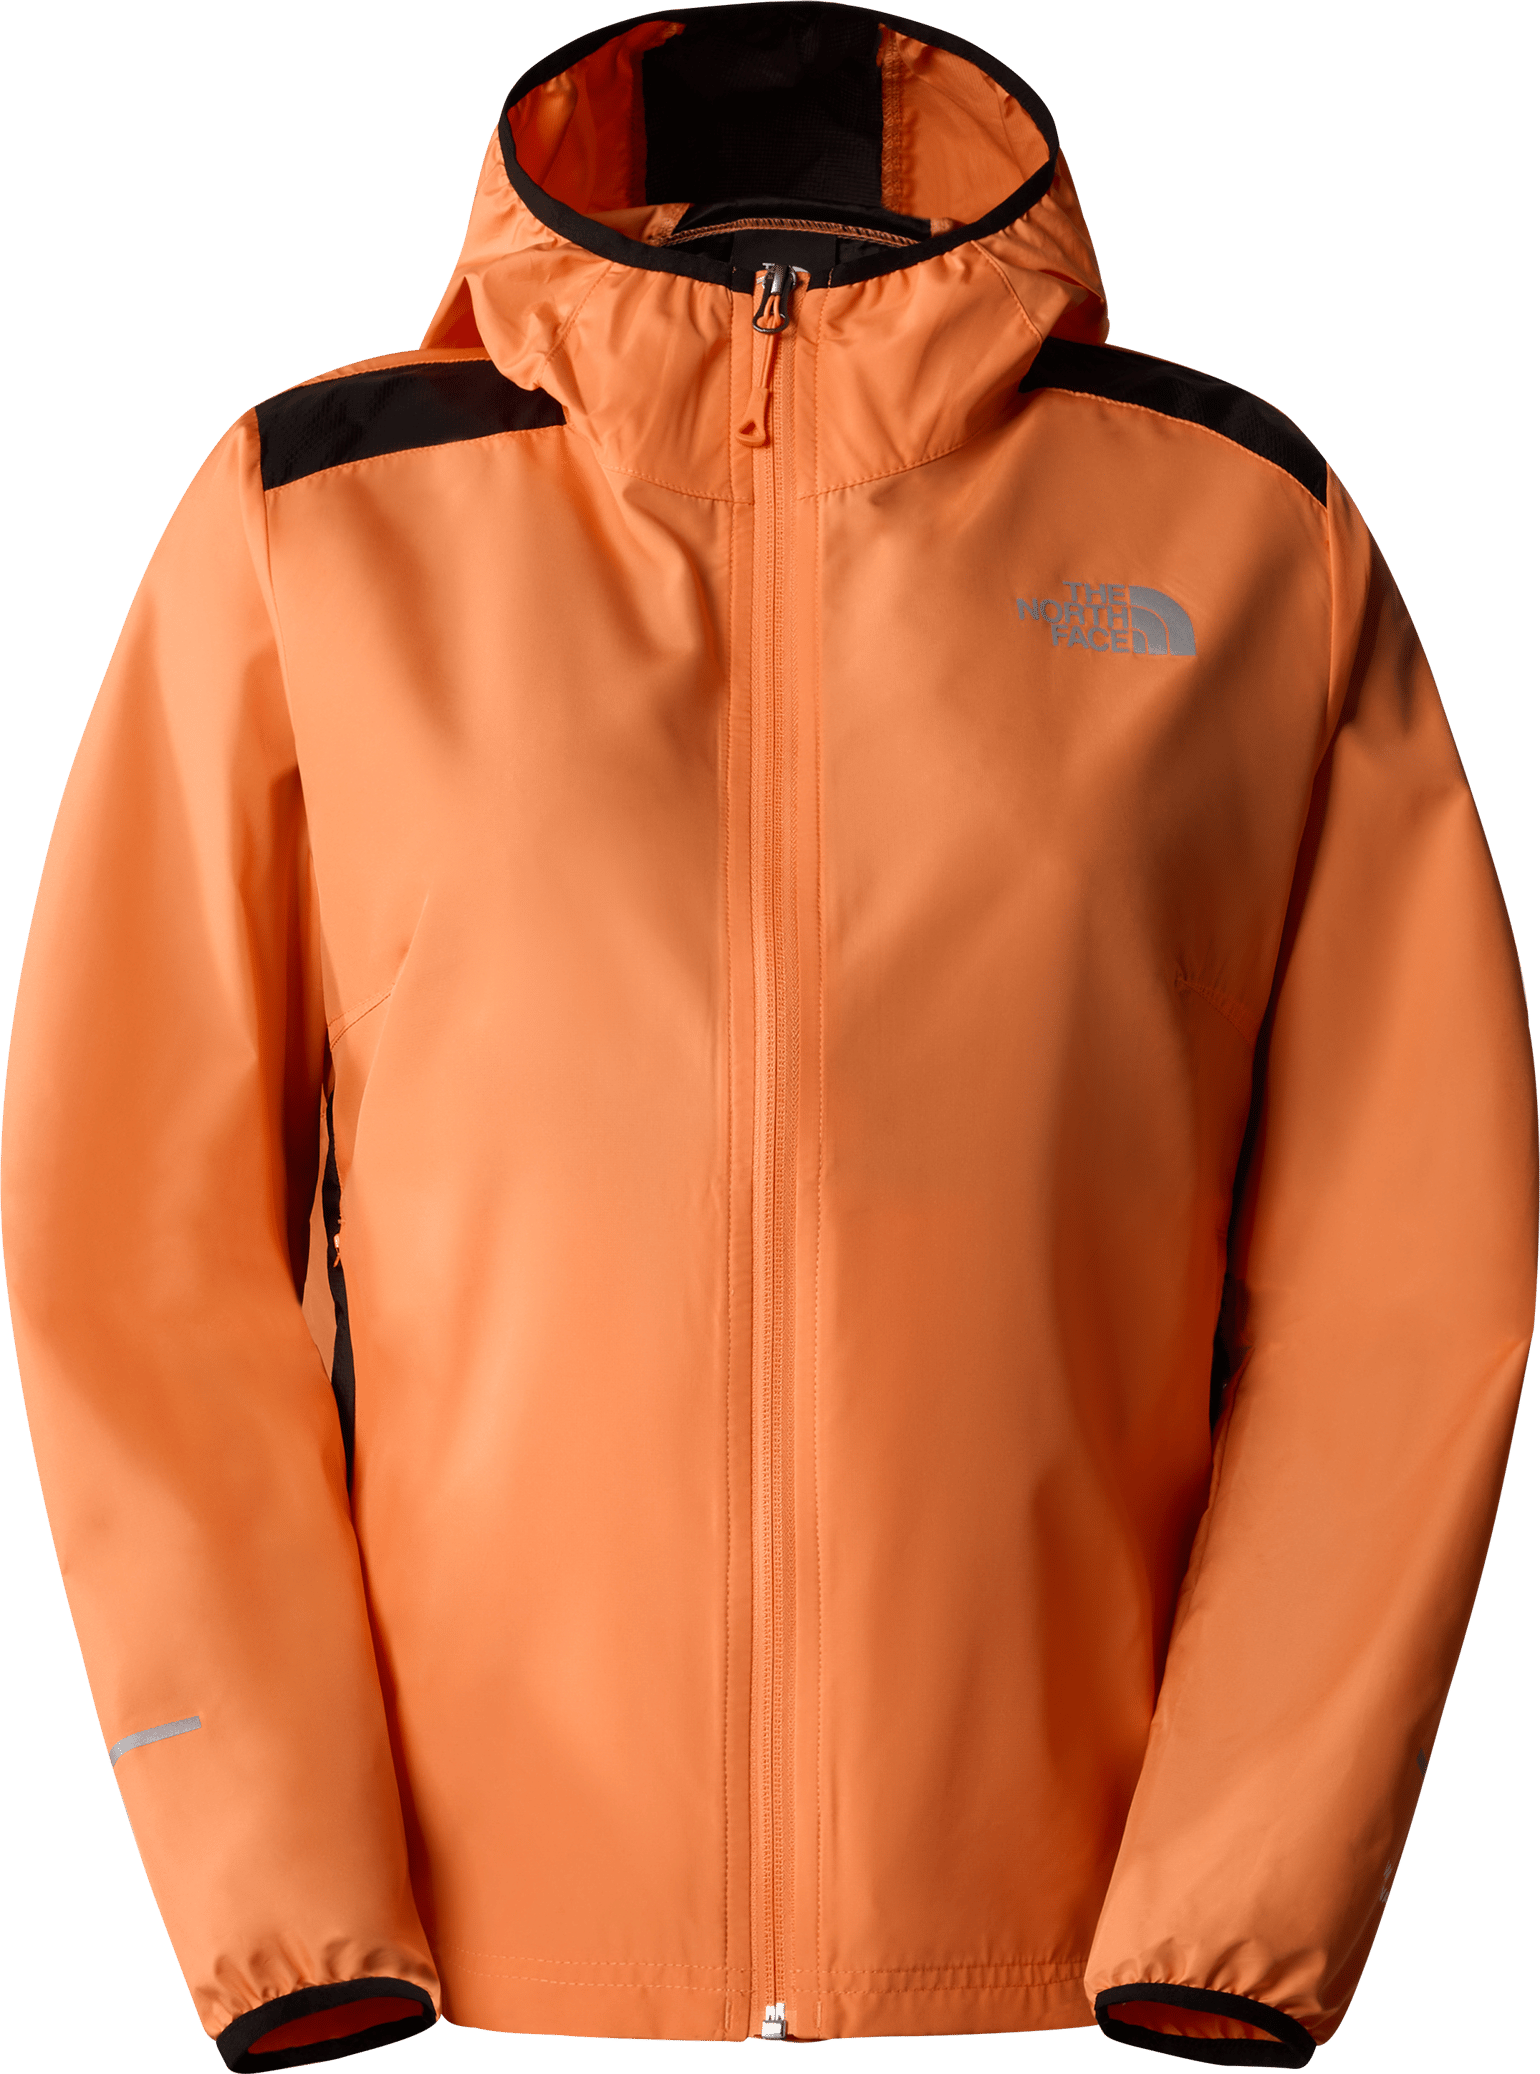 The North Face Women's Running Wind Jacket Dusty Coral Orange